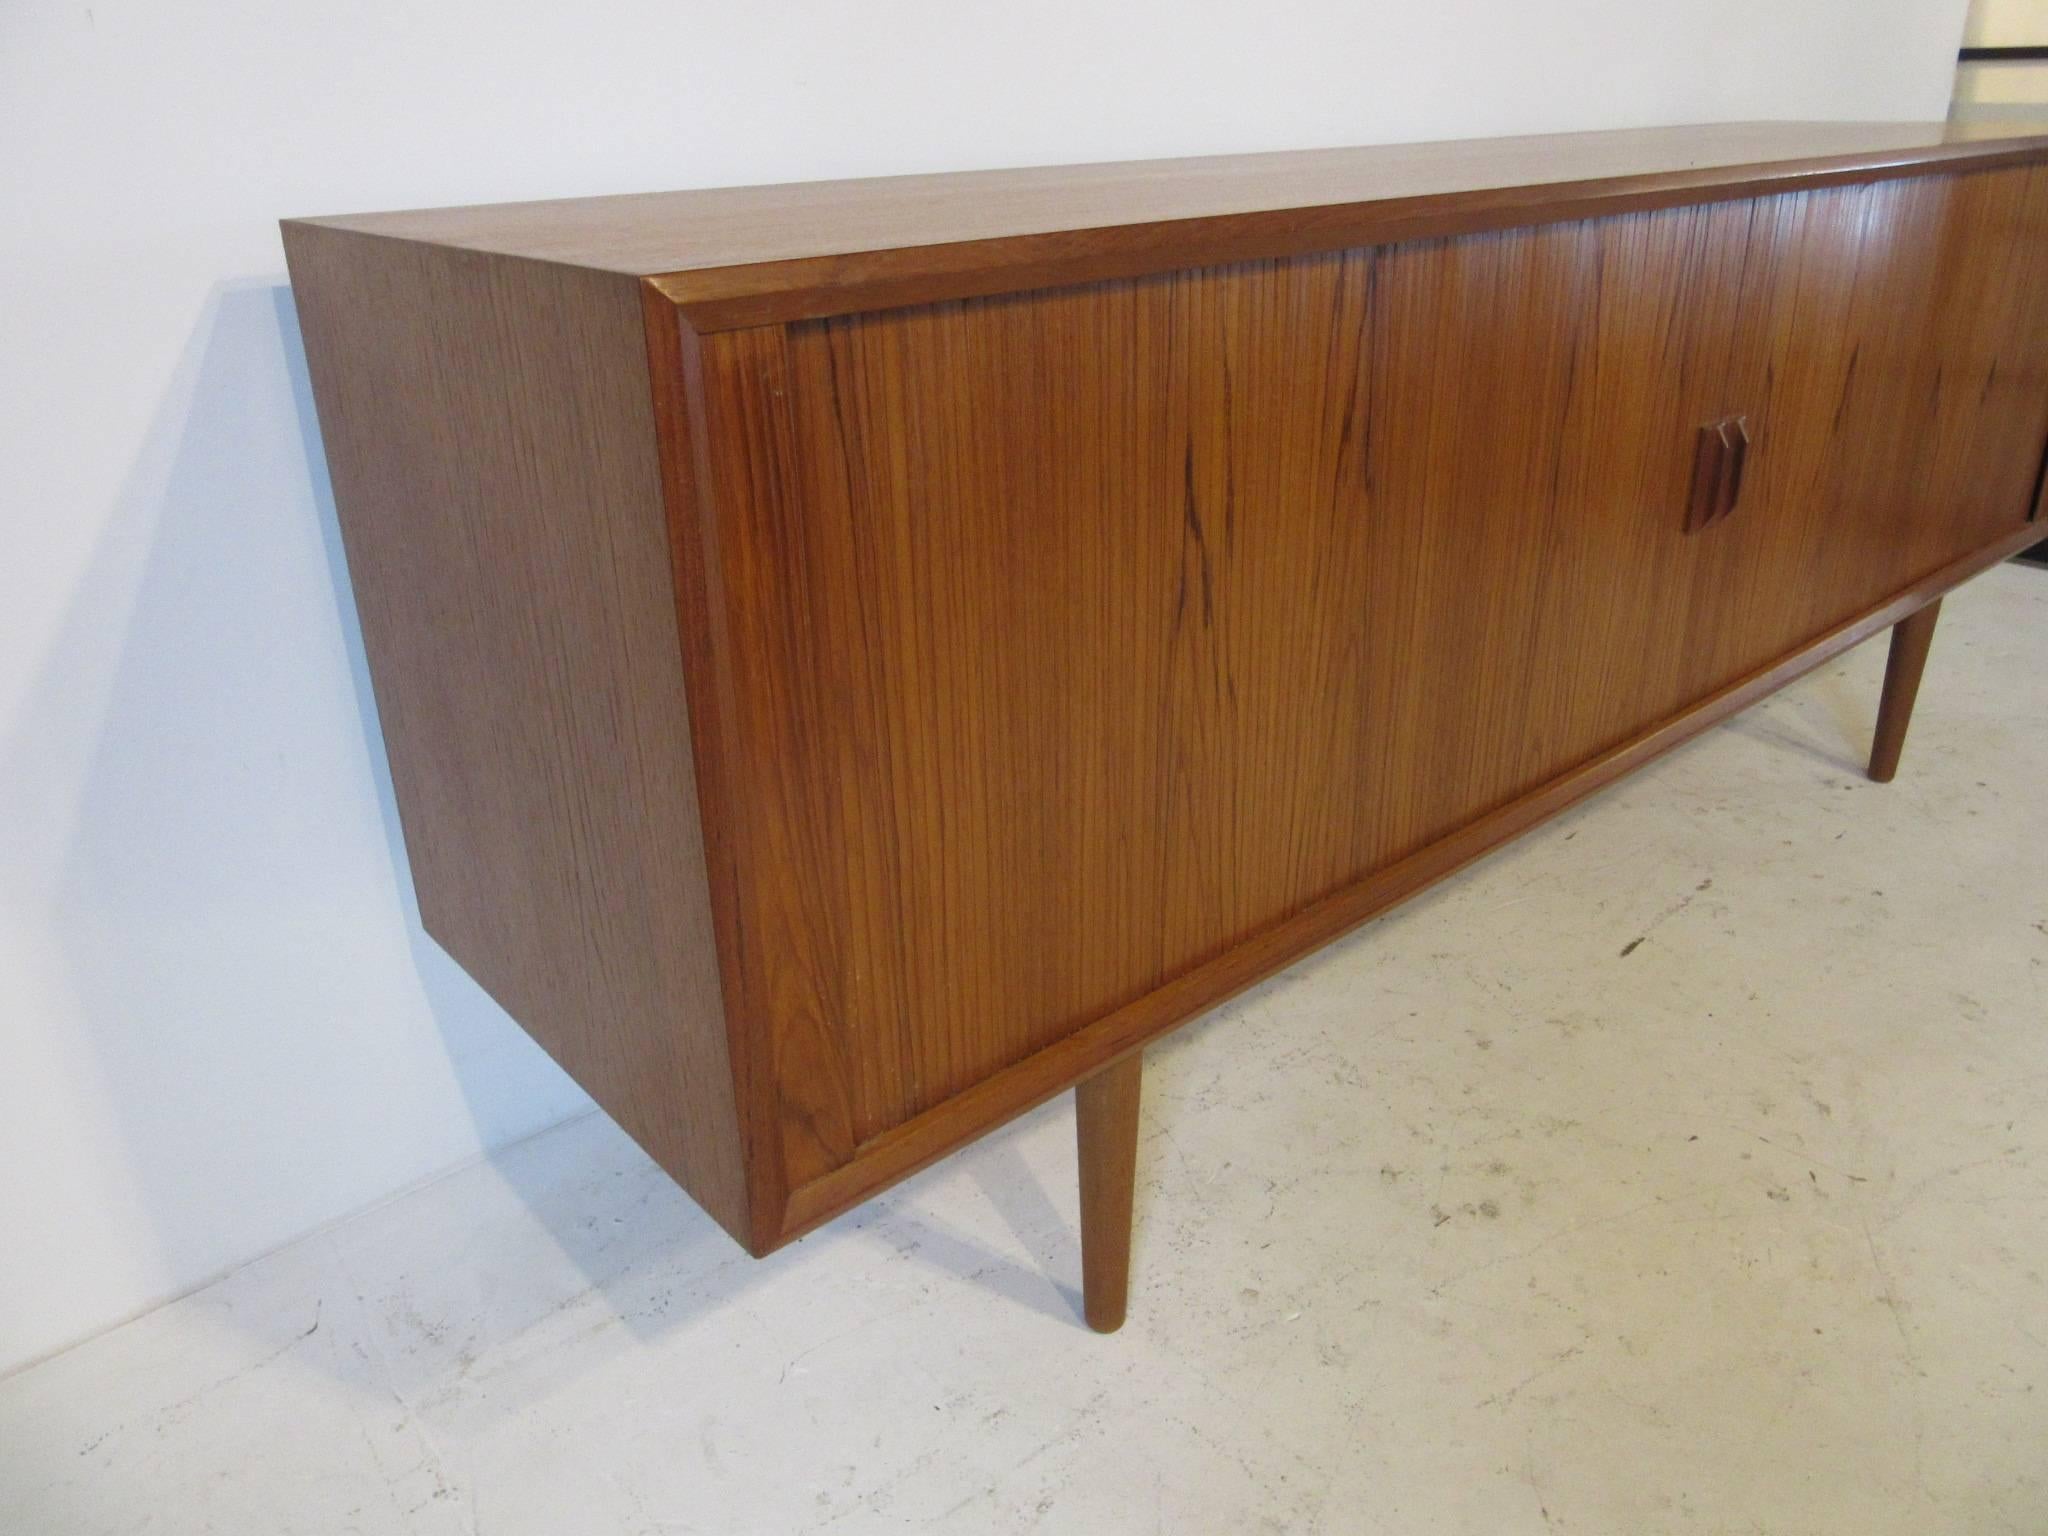 A well crafted teak wood credenza with two sliding tambour doors, four slim drawers with felt lining and three adjustable shelves and storage. Great gaining to the front and wood pulls all sitting on matching conical legs and a finished back side so